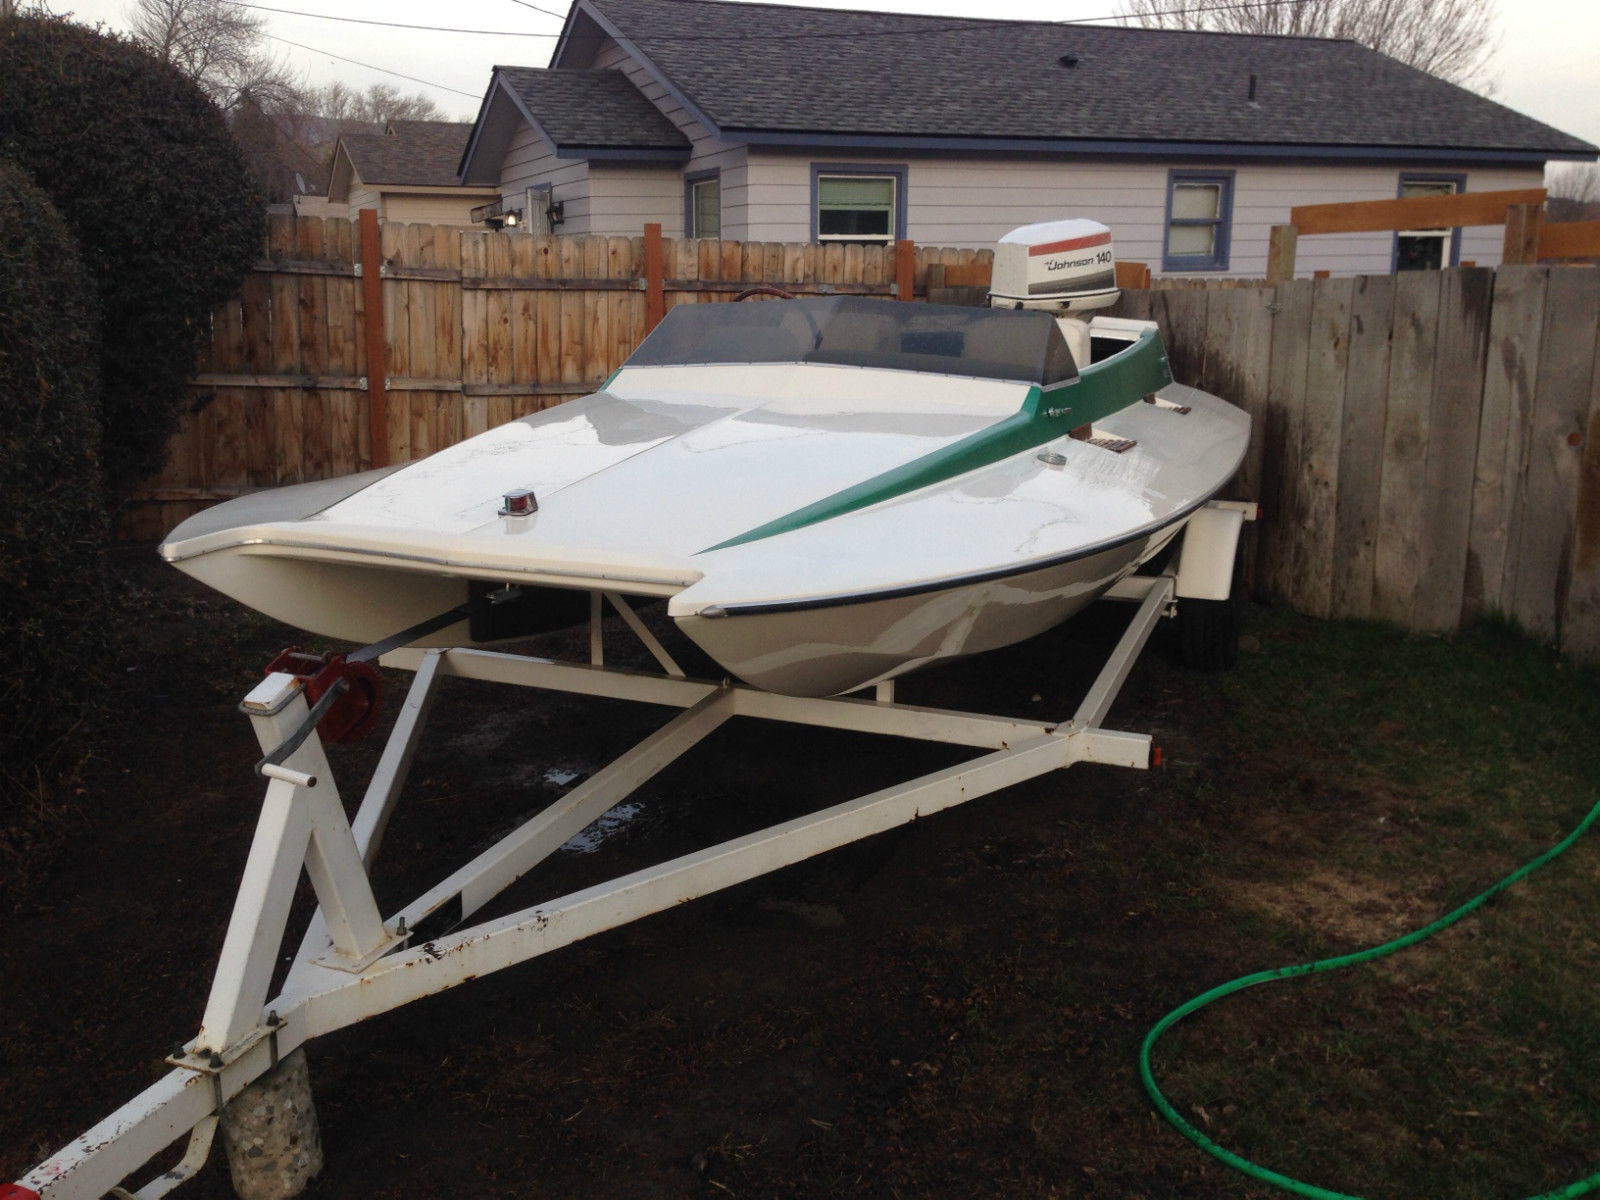 Tunnel Flite Hydro Race 1977 for sale for $5,000 - Boats 